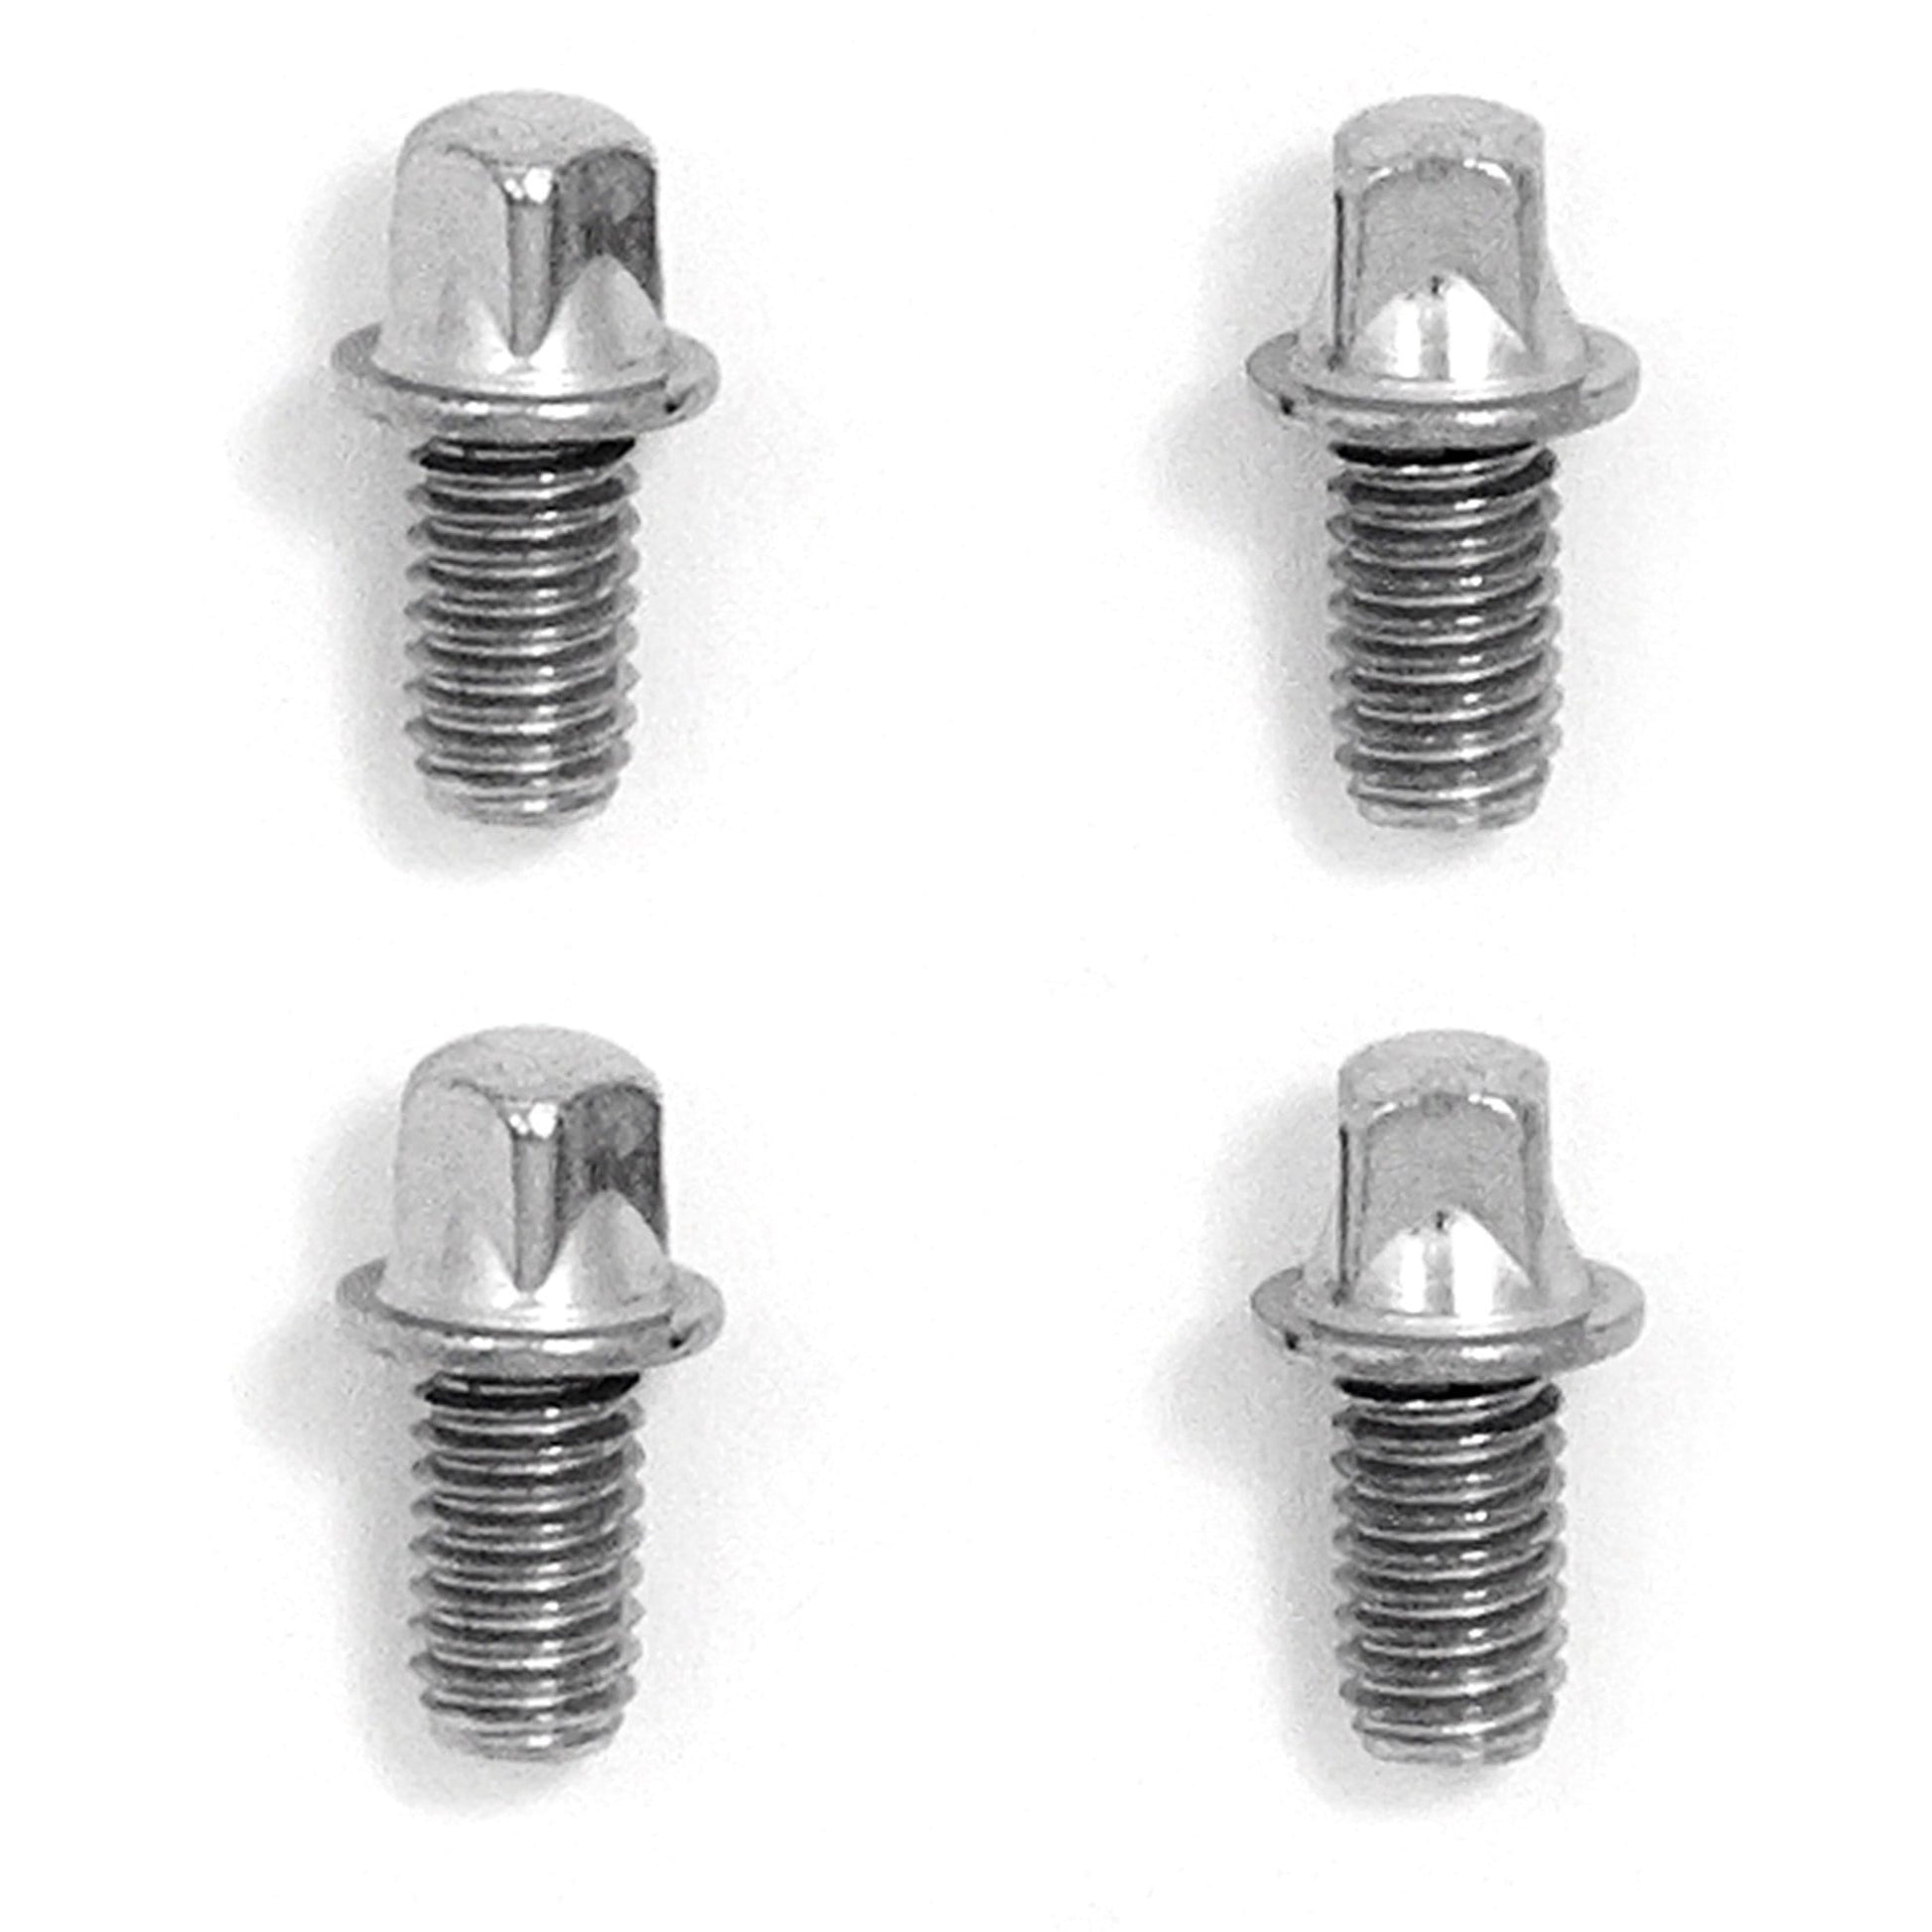 Gibraltar 6mm Key Screw for U-Joint (8 Pack Bundle) Drums and Percussion / Parts and Accessories / Drum Parts